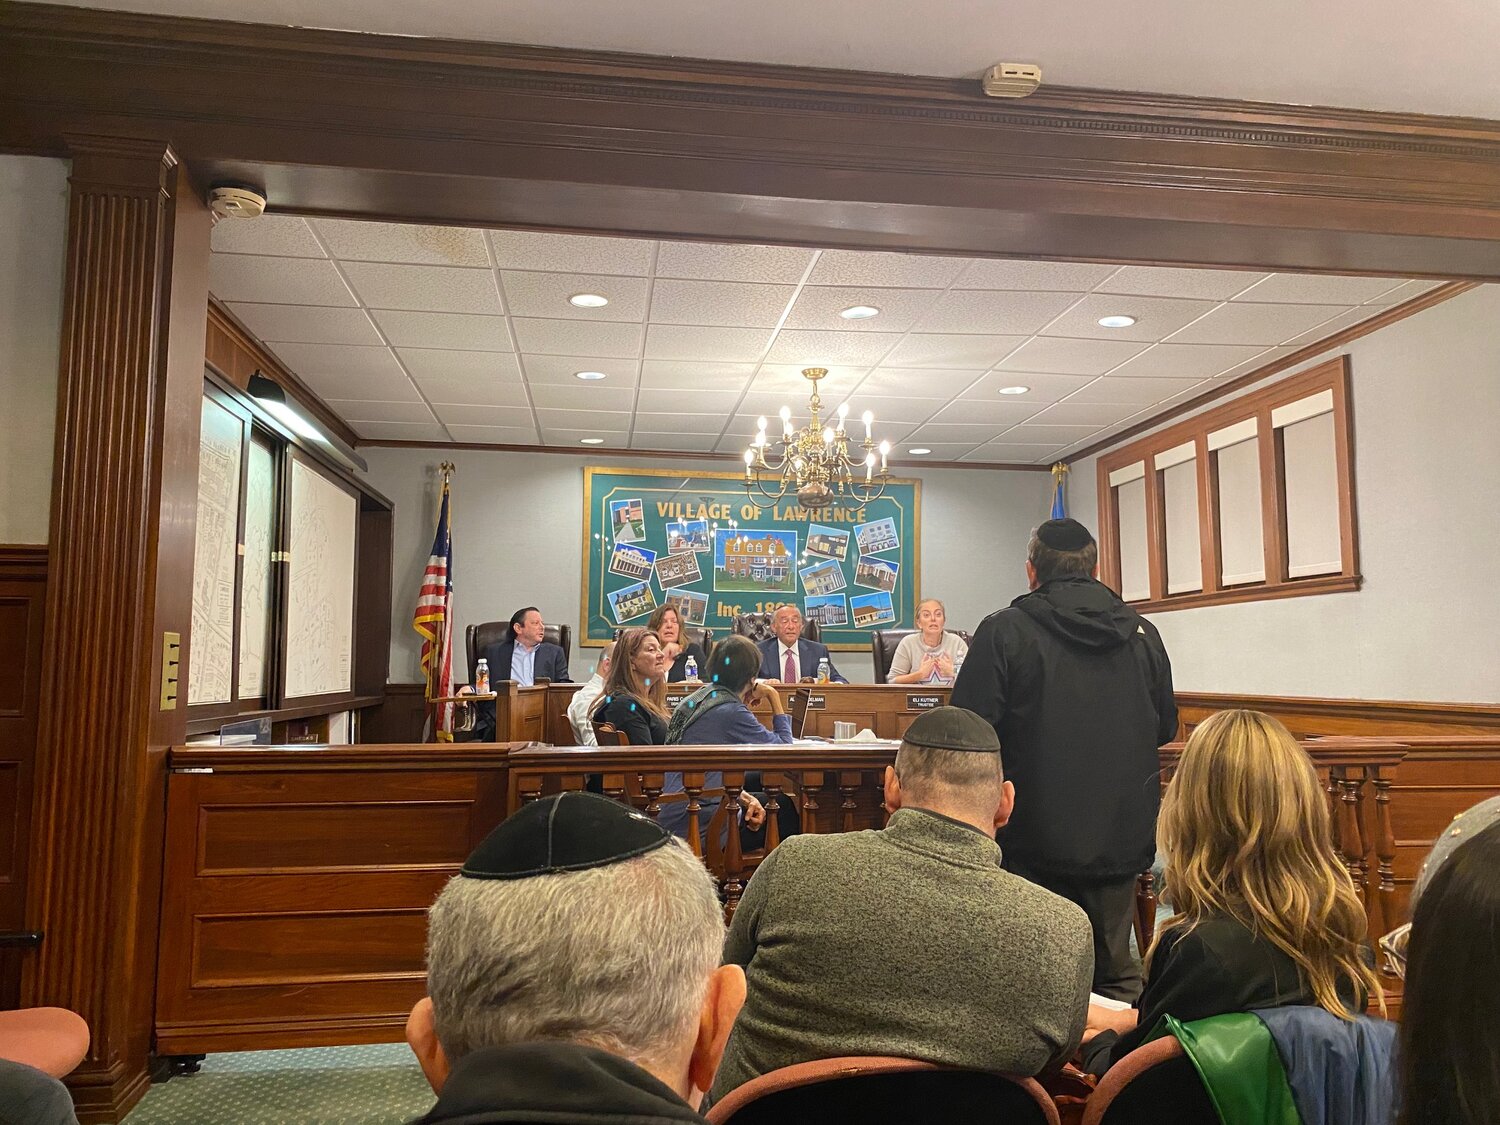 Lawrence resident Stuart Katz addressed the village board at the Nov. 9 meeting expressing dissatisfaction with the handling of the South Lord Avenue gate.